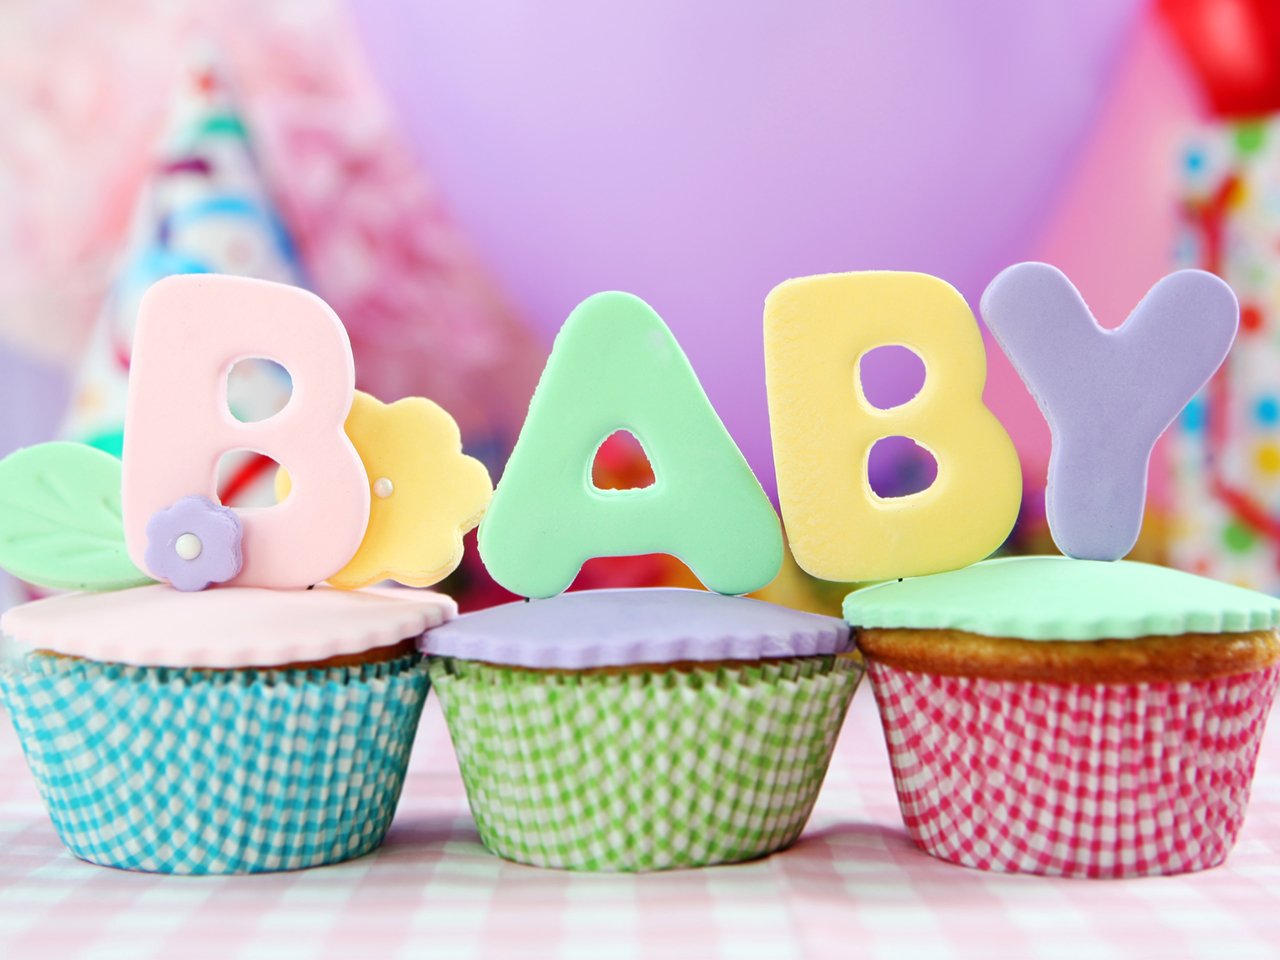 the word Baby spelled out on top of cupcakes